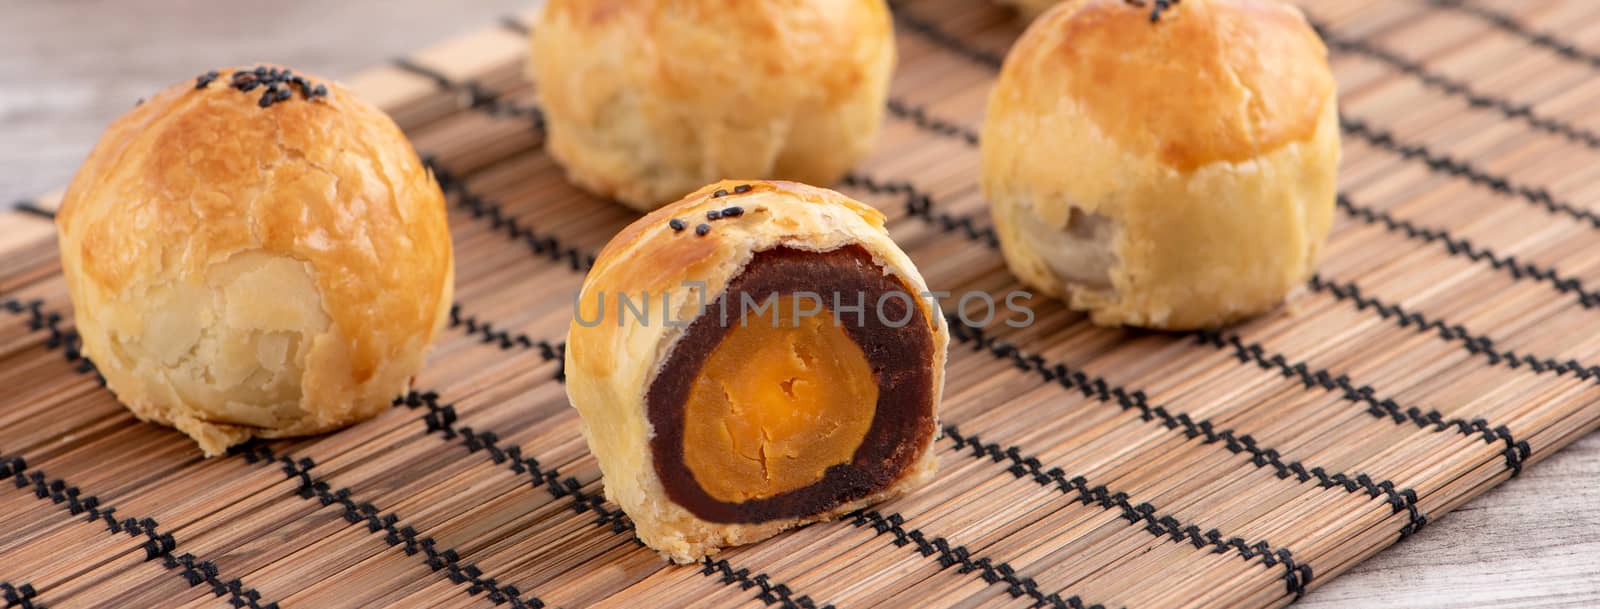 Moon cake yolk pastry, mooncake for Mid-Autumn Festival holiday, top view design concept on bright wooden table with copy space